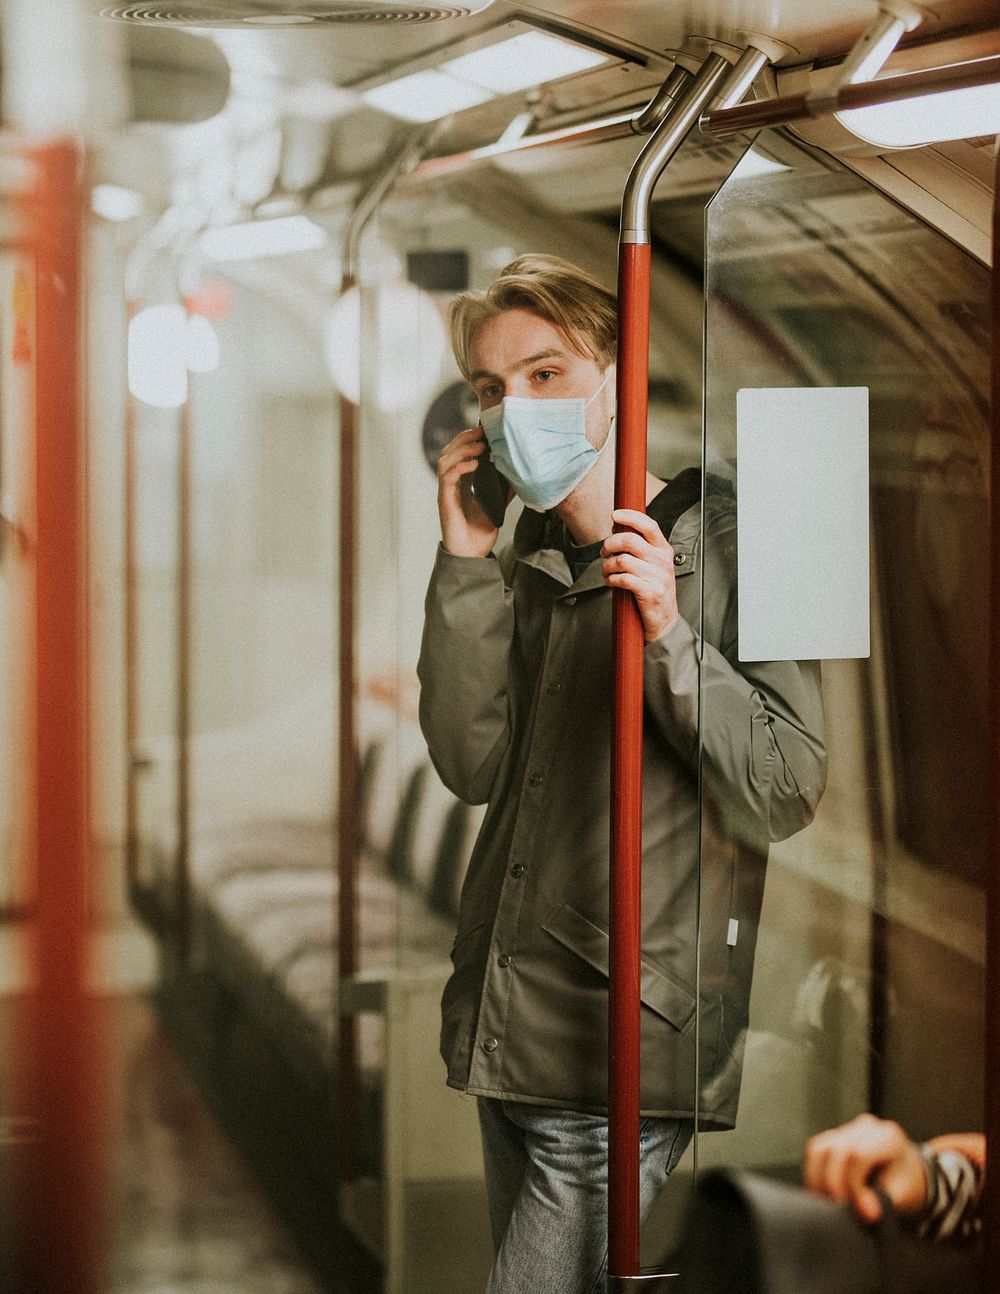 Man using a phone on a train in the new normal 